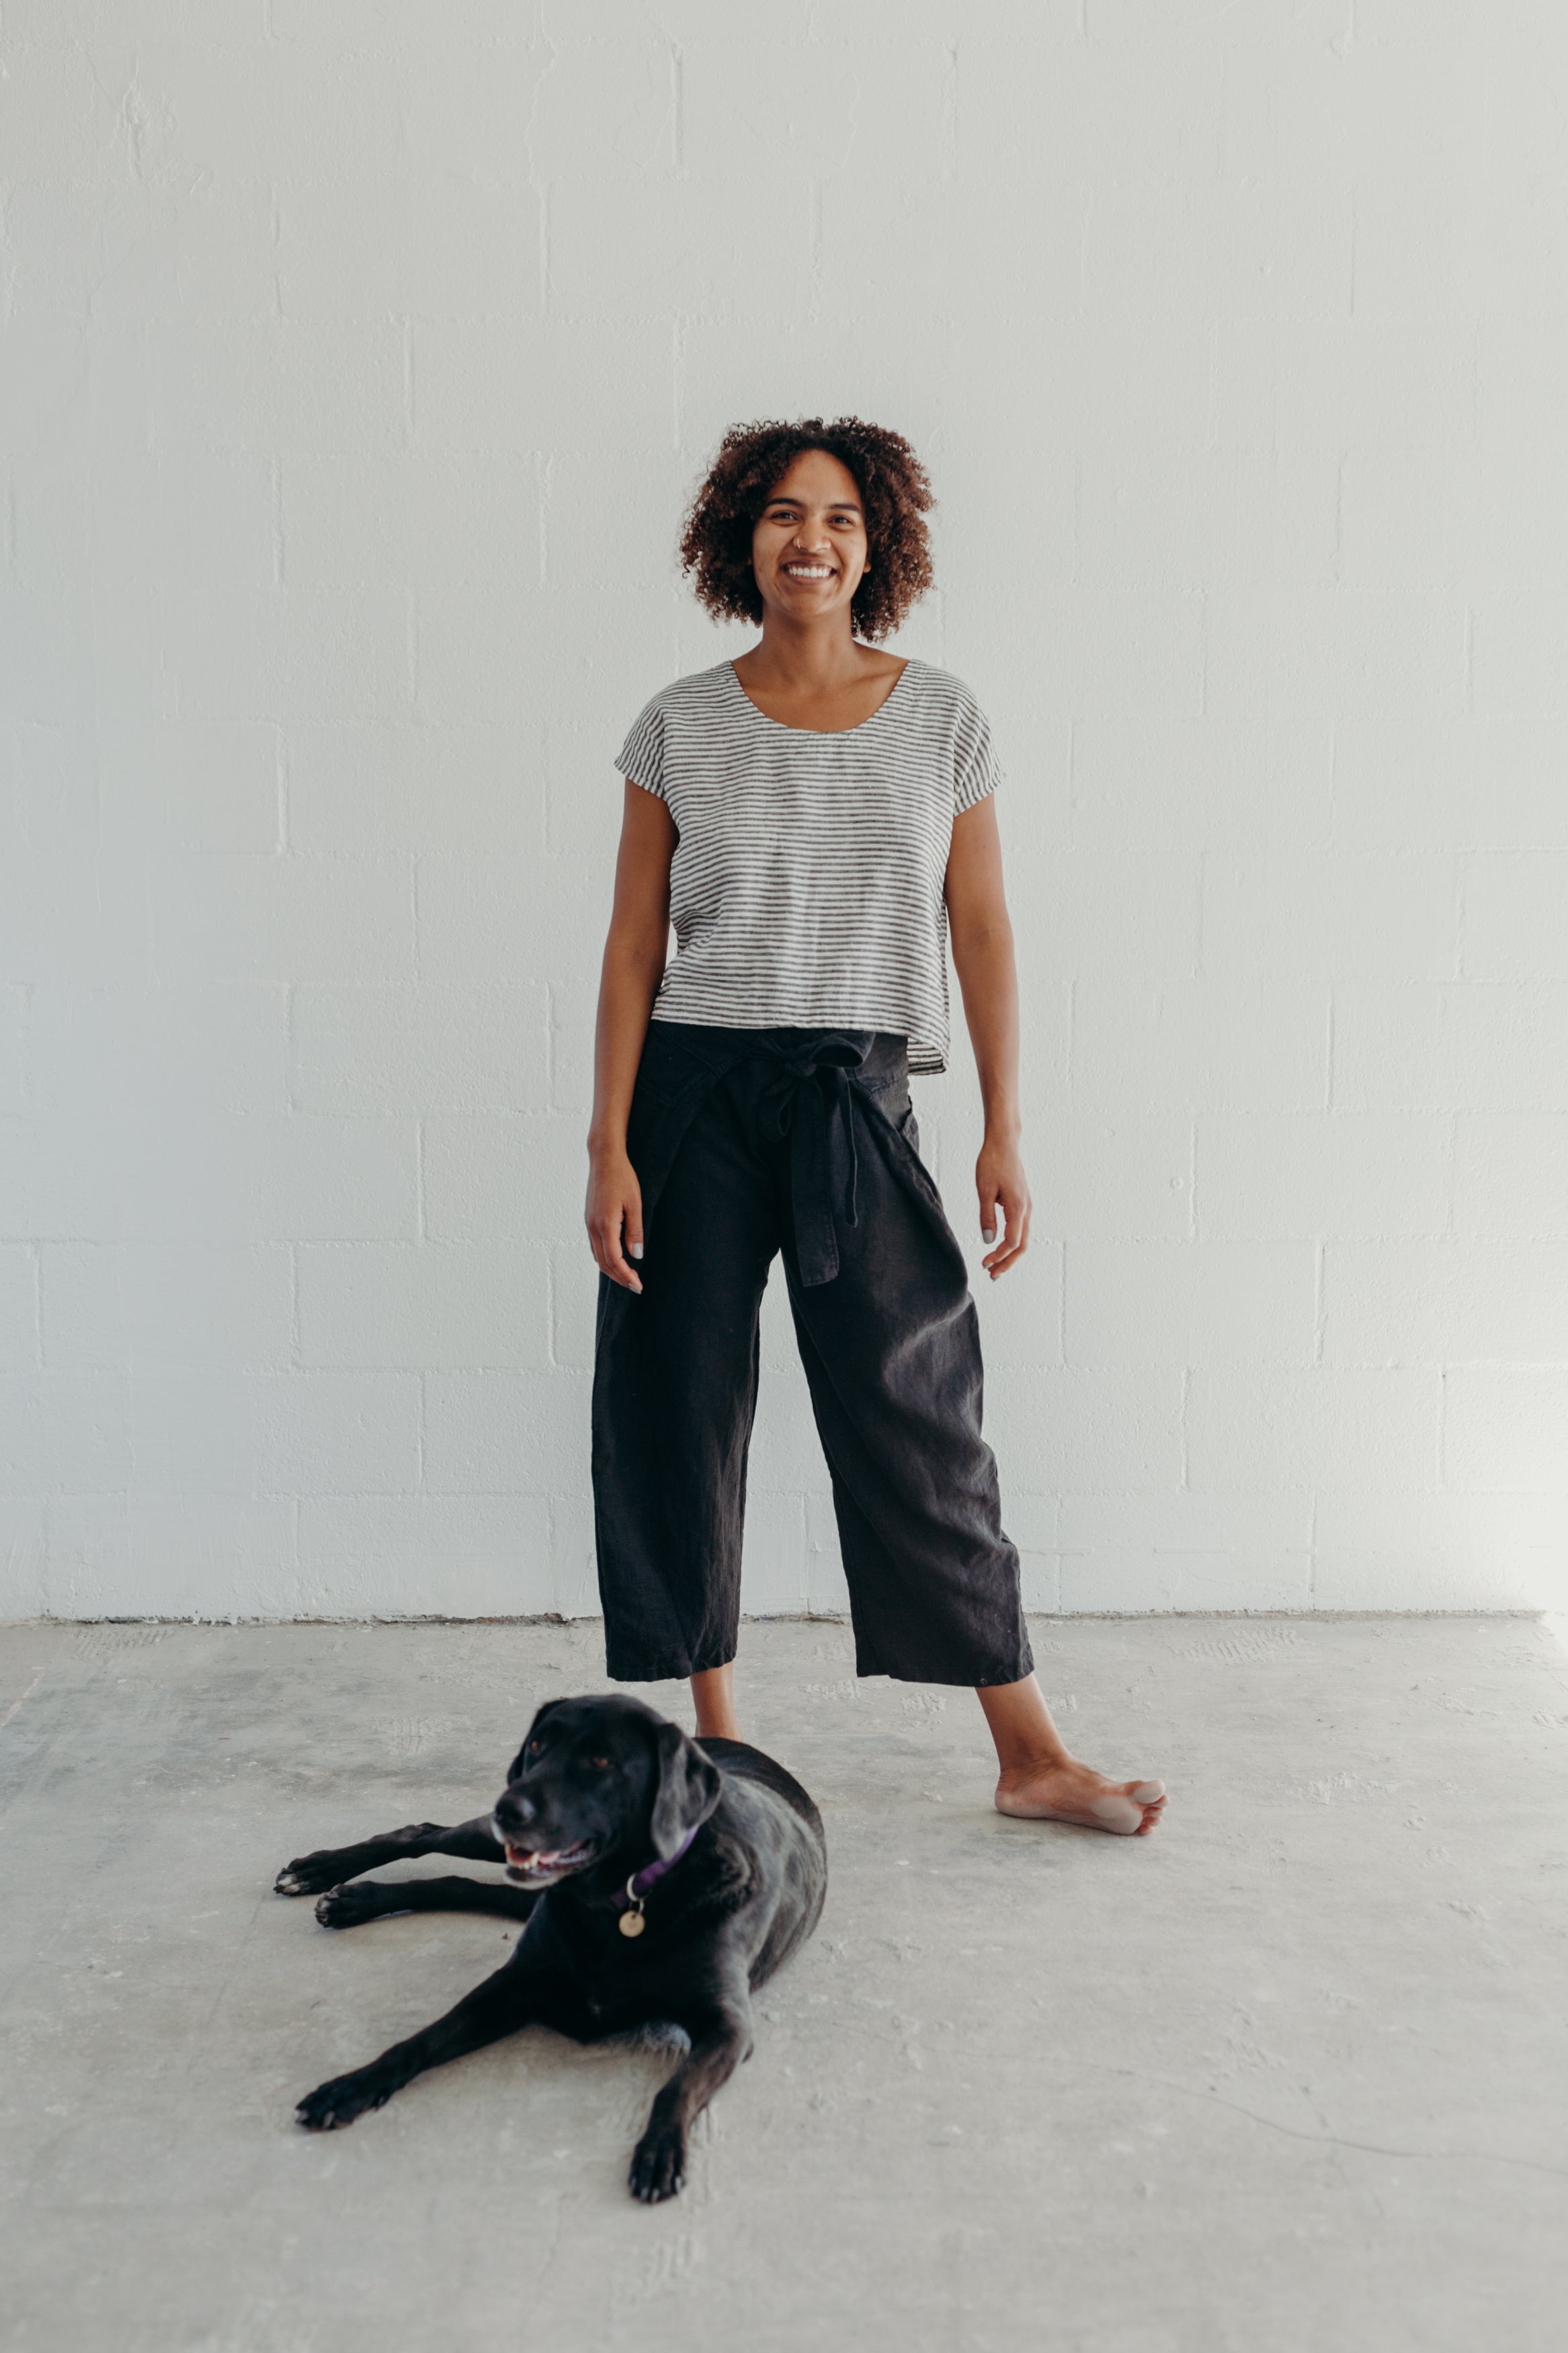 Palazzo Wrap Pants Sewing Pattern, Unbelievable Comfy and Ea